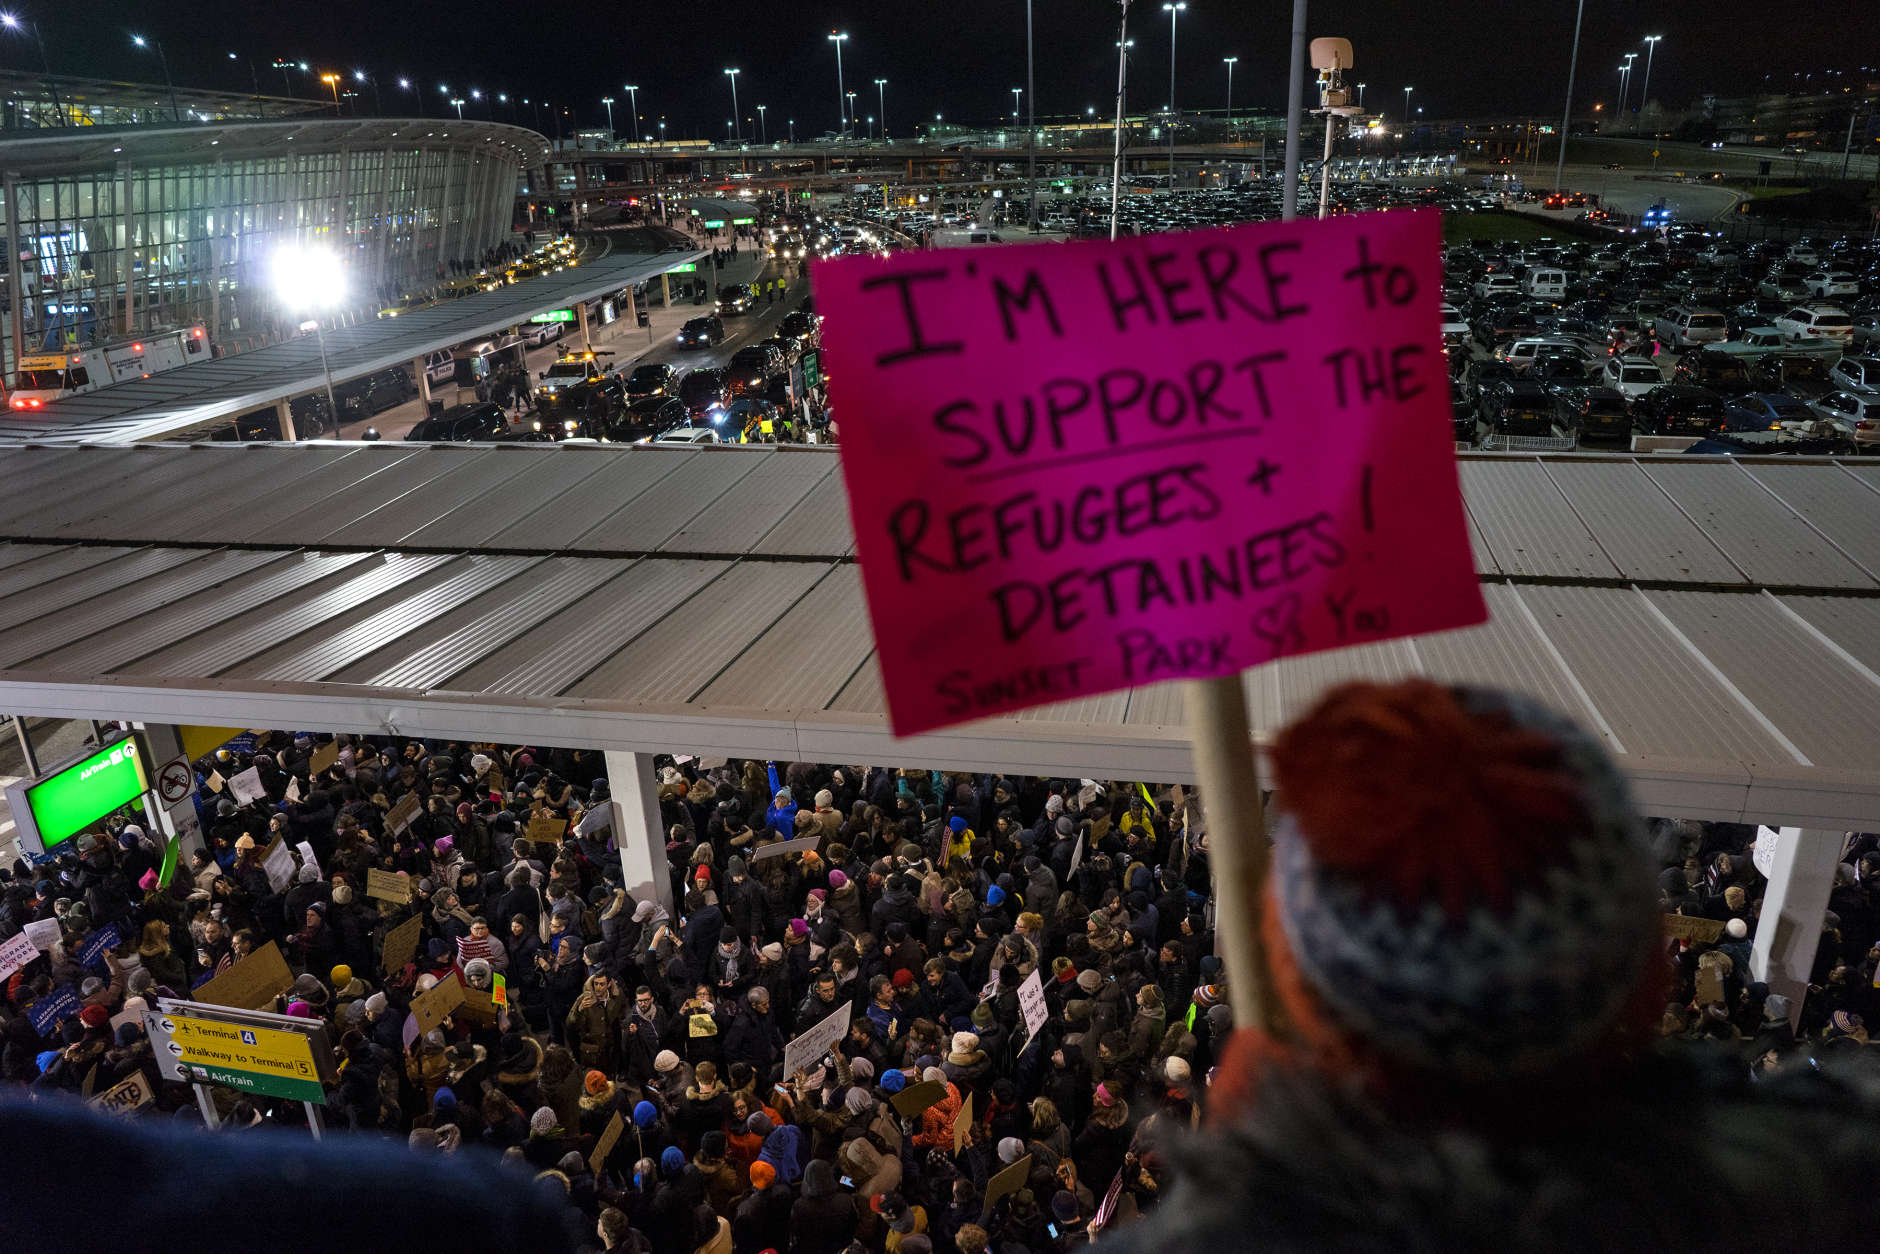 Protesters assemble at John F. Kennedy International Airport in New York, Saturday, Jan. 28, 2017 after earlier in the day two Iraqi refugees were detained while trying to enter the country. On Friday, Jan. 27, President Donald Trump signed an executive order suspending all immigration from countries with terrorism concerns for 90 days. Countries included in the ban are Iraq, Syria, Iran, Sudan, Libya, Somalia and Yemen, which are all Muslim-majority nations. (AP Photo/Craig Ruttle)